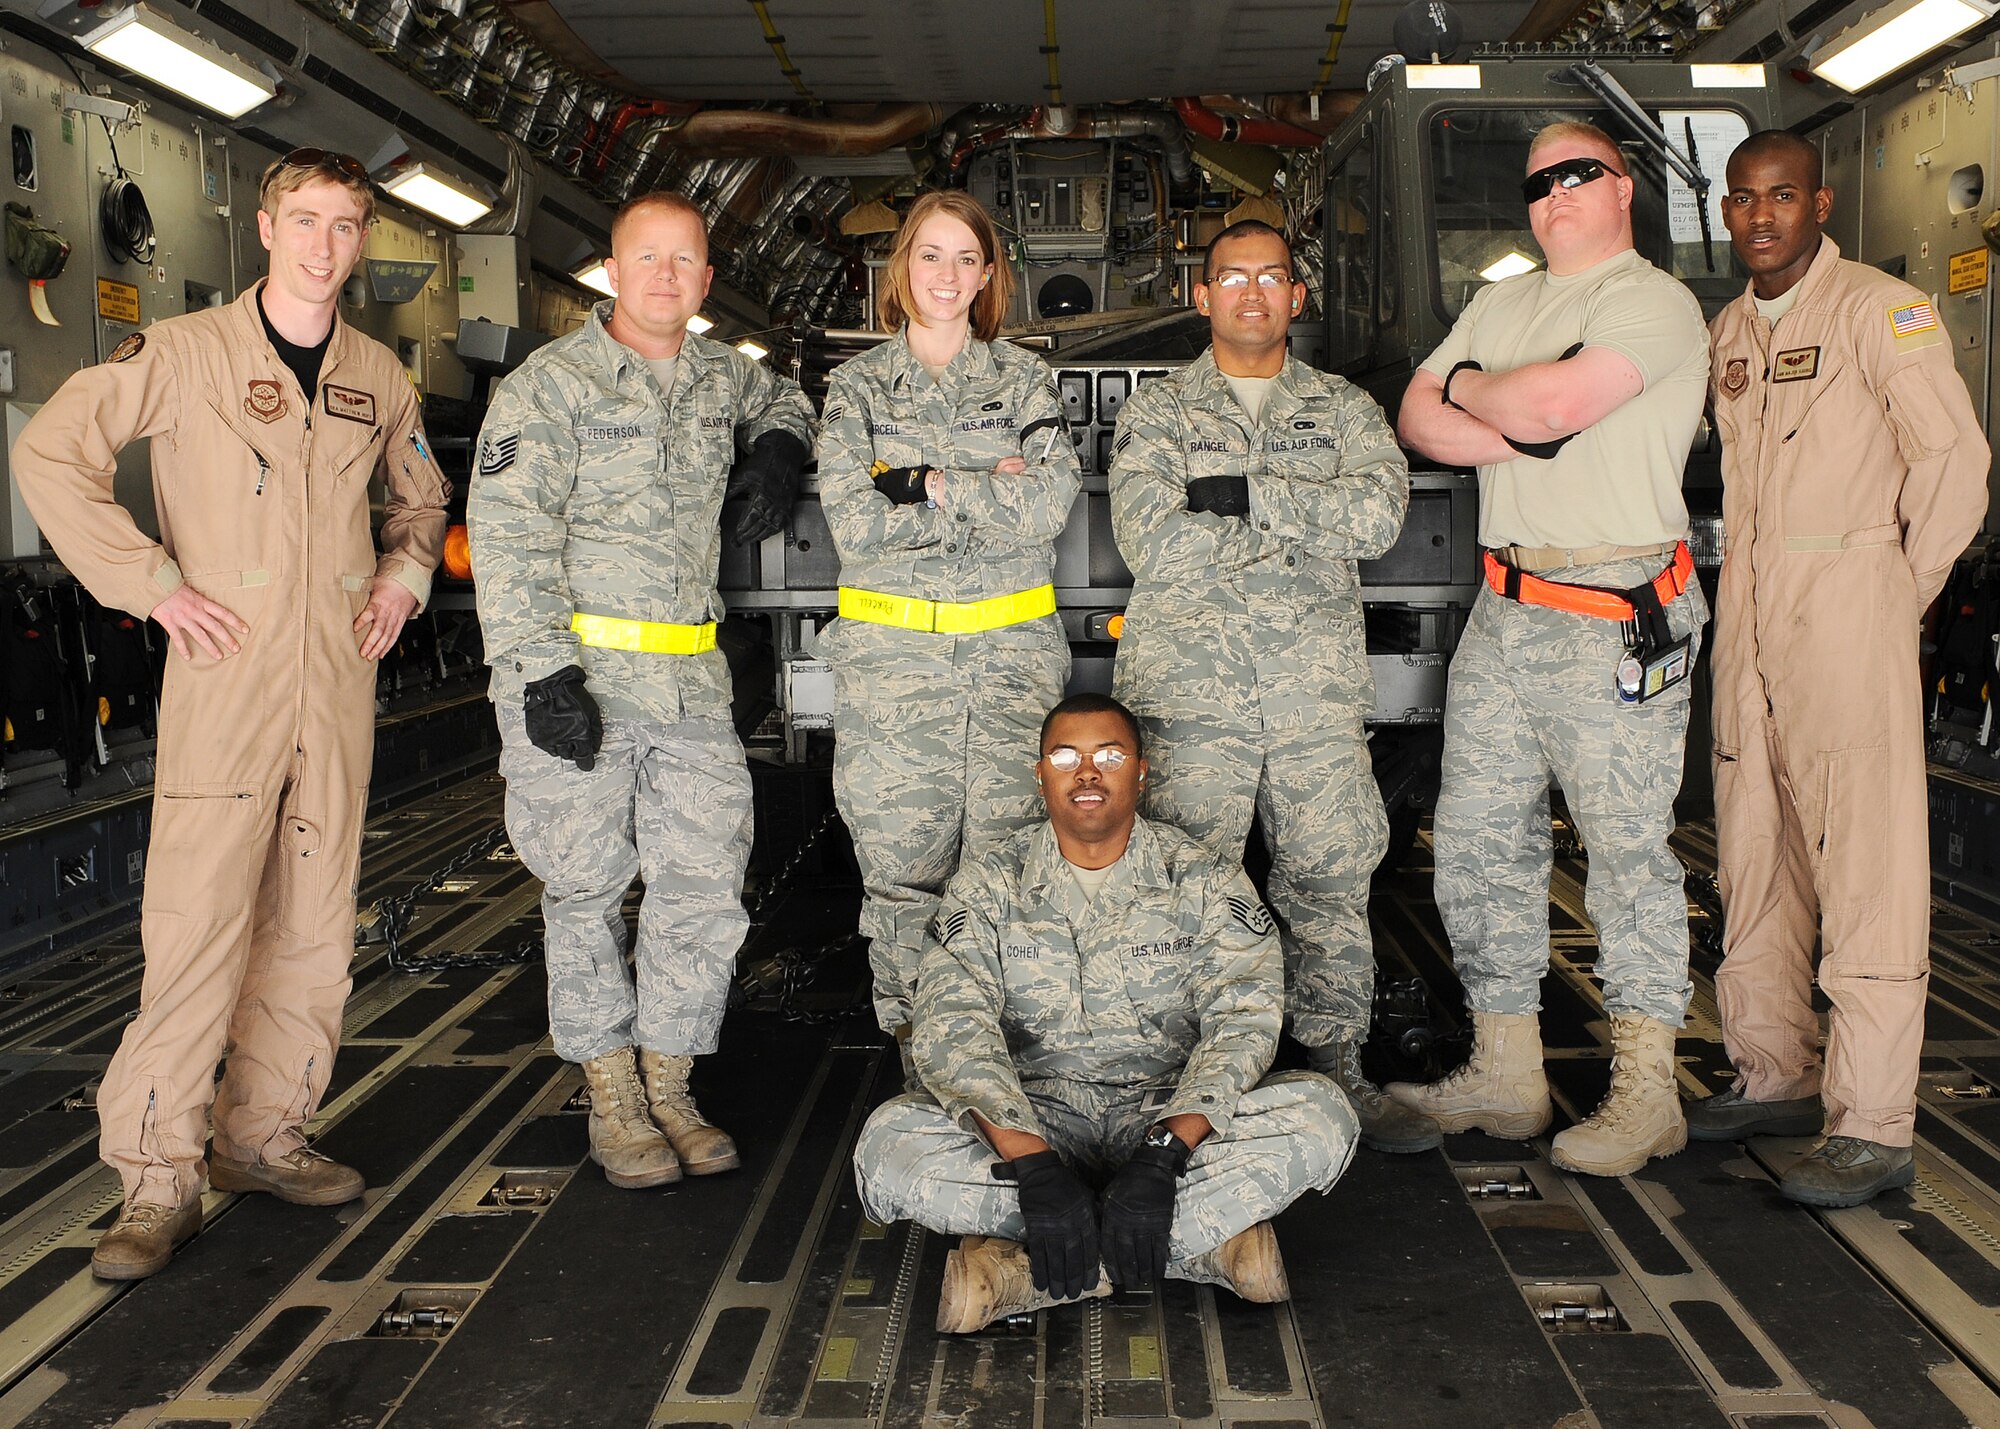 Members from the 49th Logistics Readiness Squadron load team pose for a group photo with the loadmasters of the C-17 from McChord Air Force Base, Wash., after loading a 60,000 pound aircraft loader at Holloman Air Force Base, N.M., March 3. The loader is being deployed to CENTAF to assist with cargo operations in the AOR. (U.S. Air Force photo/ Airman 1st Class DeAndre Curtiss)